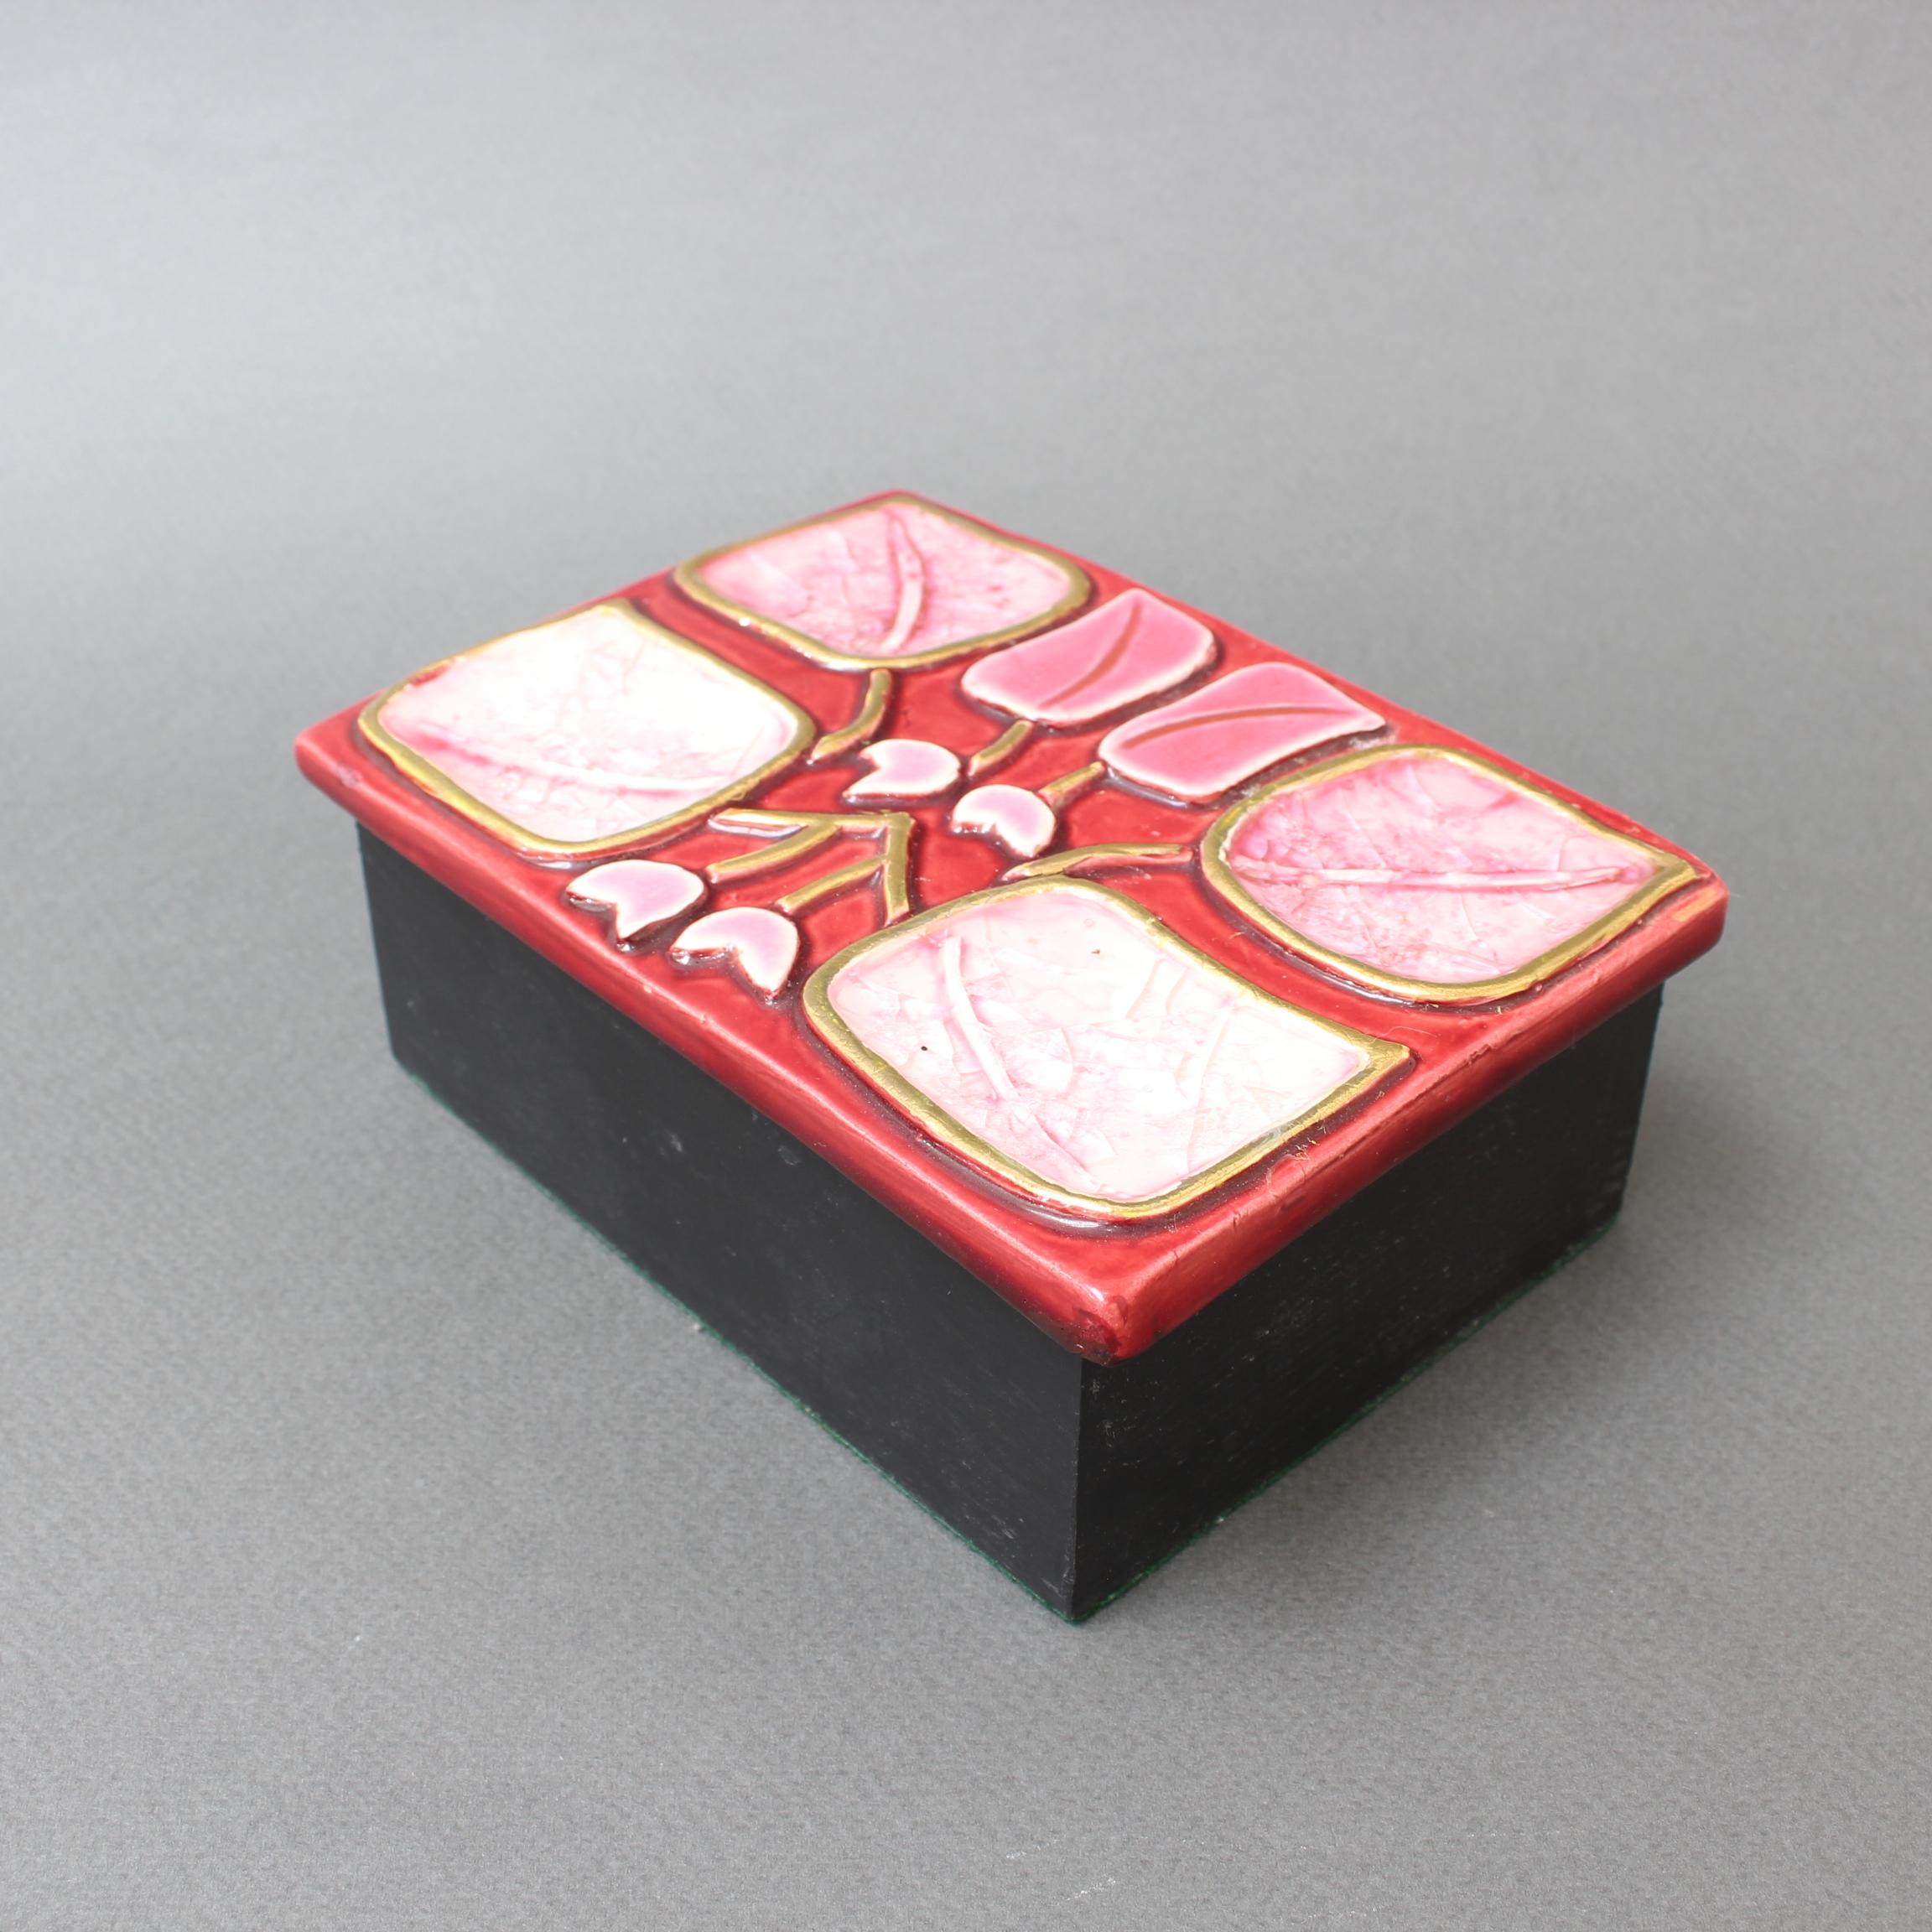 Mid-20th Century Jewellery Box with Decorative Enamel Lid by François Lembo, circa 1960s